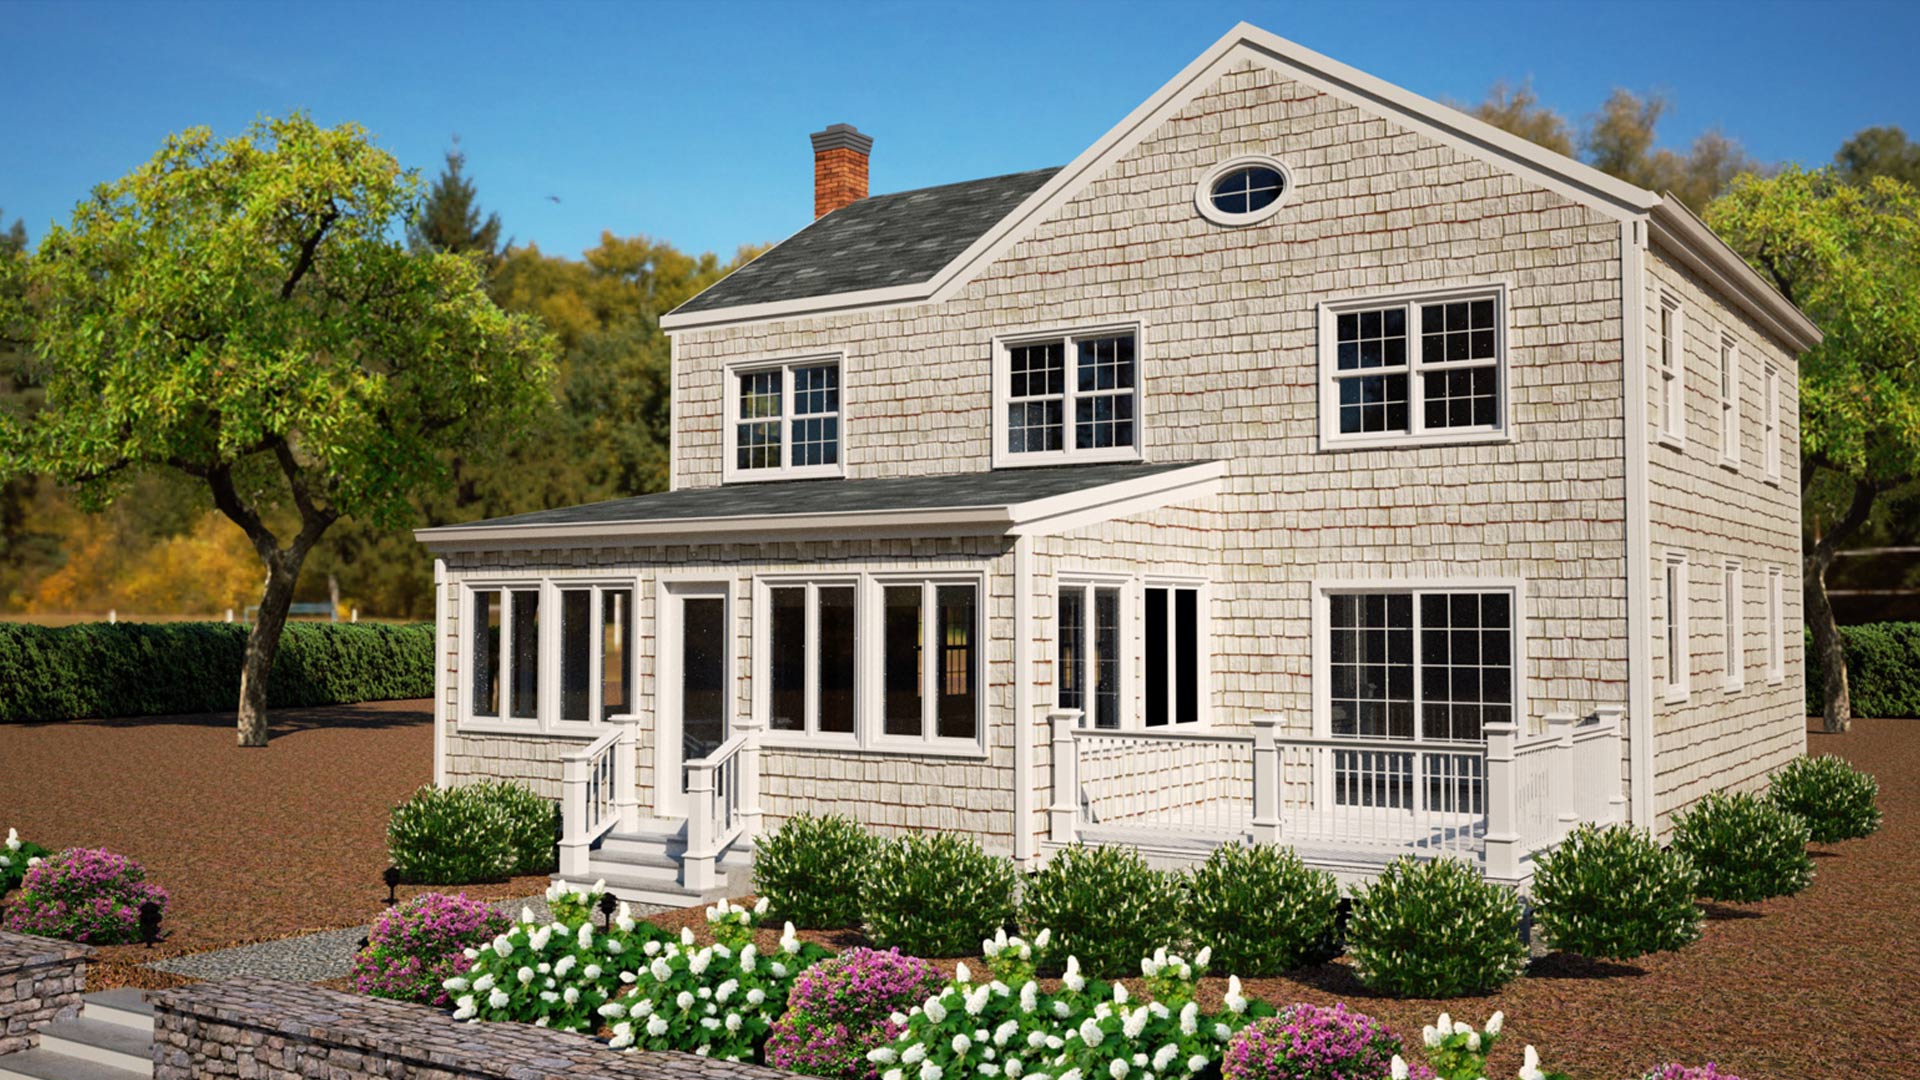 Exterior rendering of a Beach house in Niantic, Connecticut